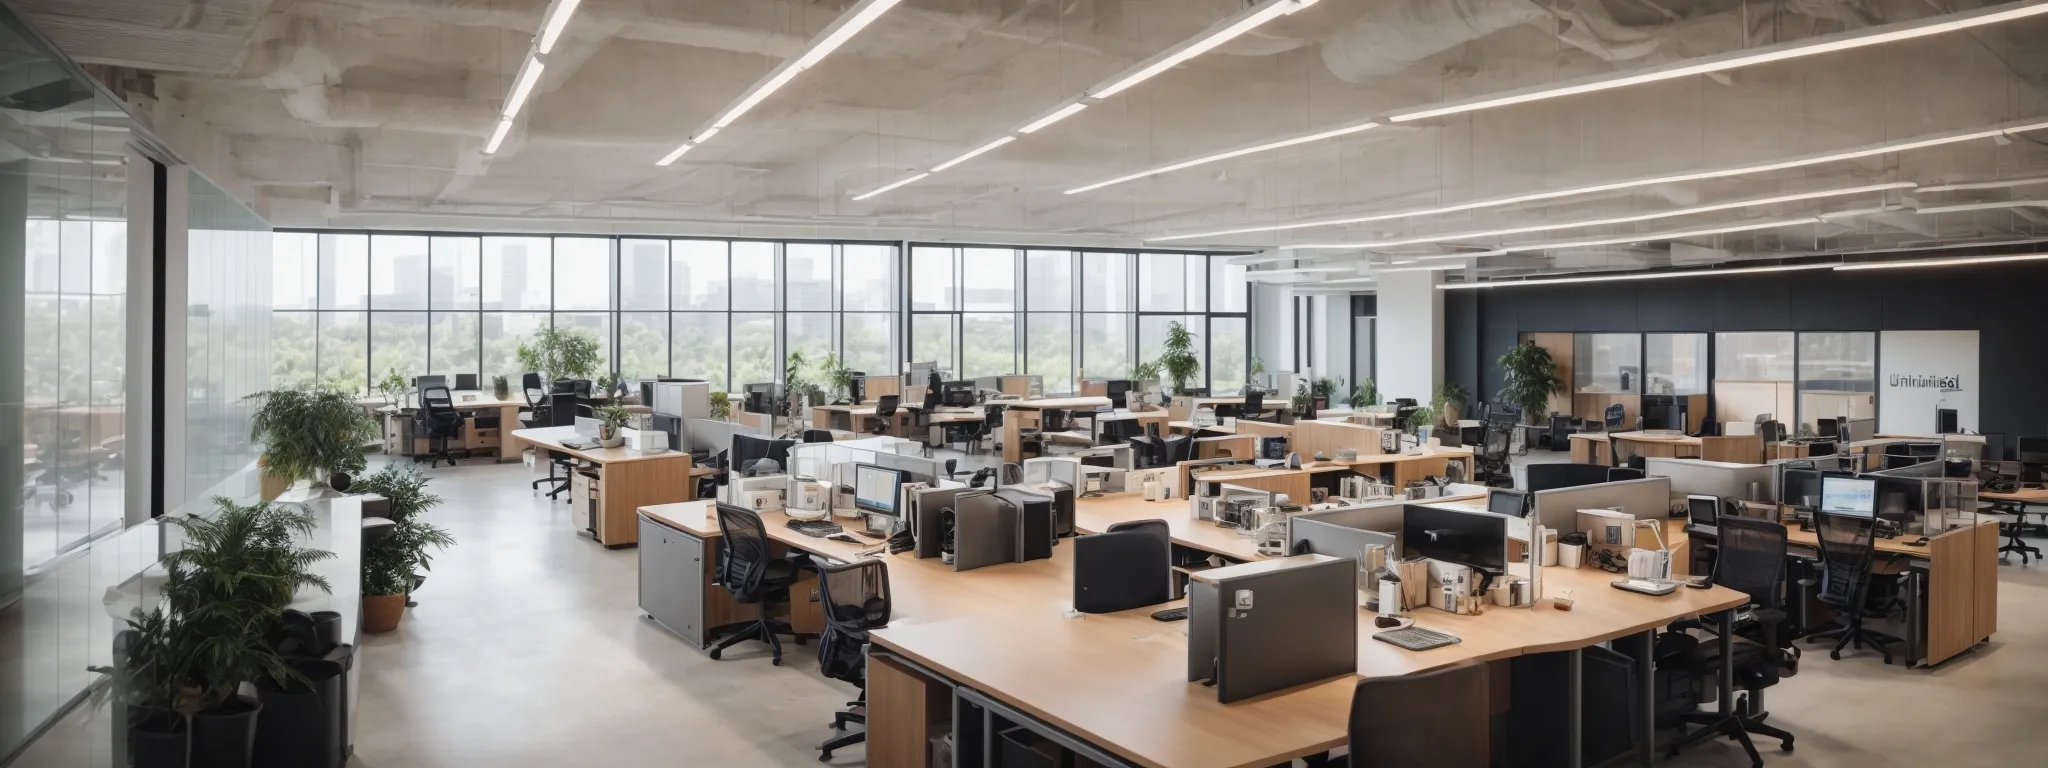 a spacious corporate office with clusters of desks representing a large, established company on one side and an open, modern co-working space symbolizing a startup on the other side.